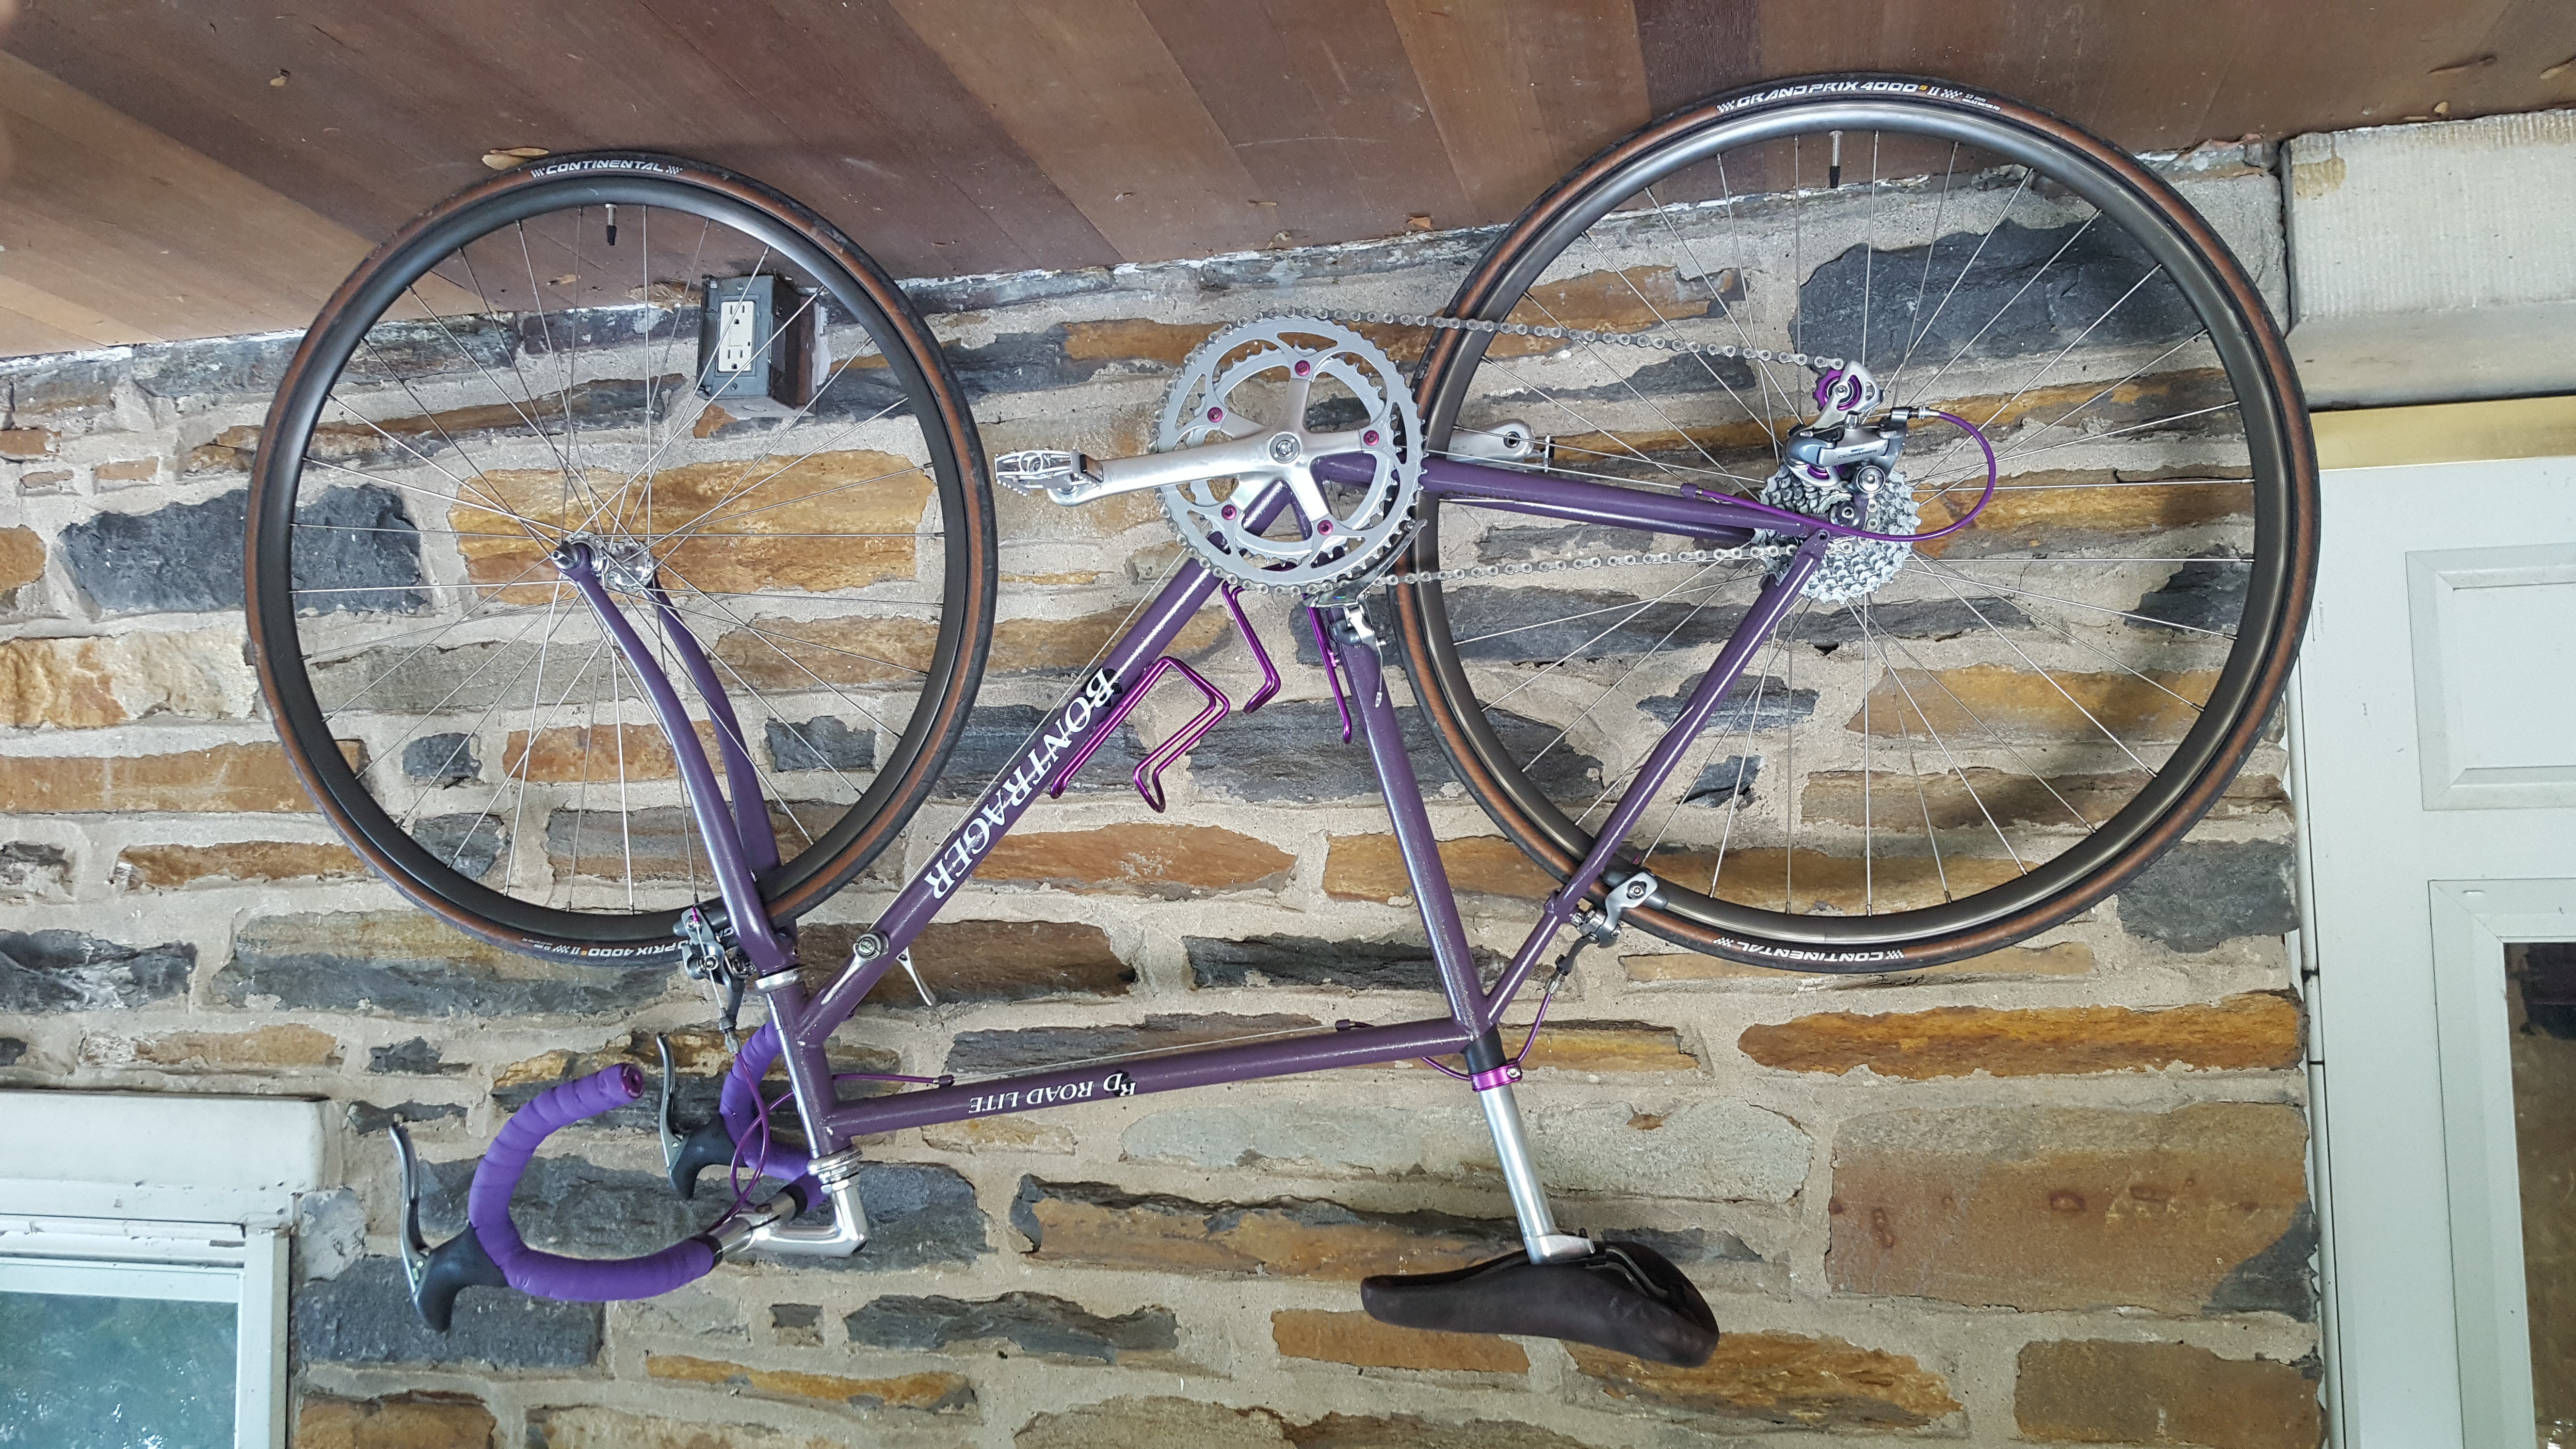 A purple bicycle posed against a stone wall. Purple derailleur wheels and crank bolts are visible.